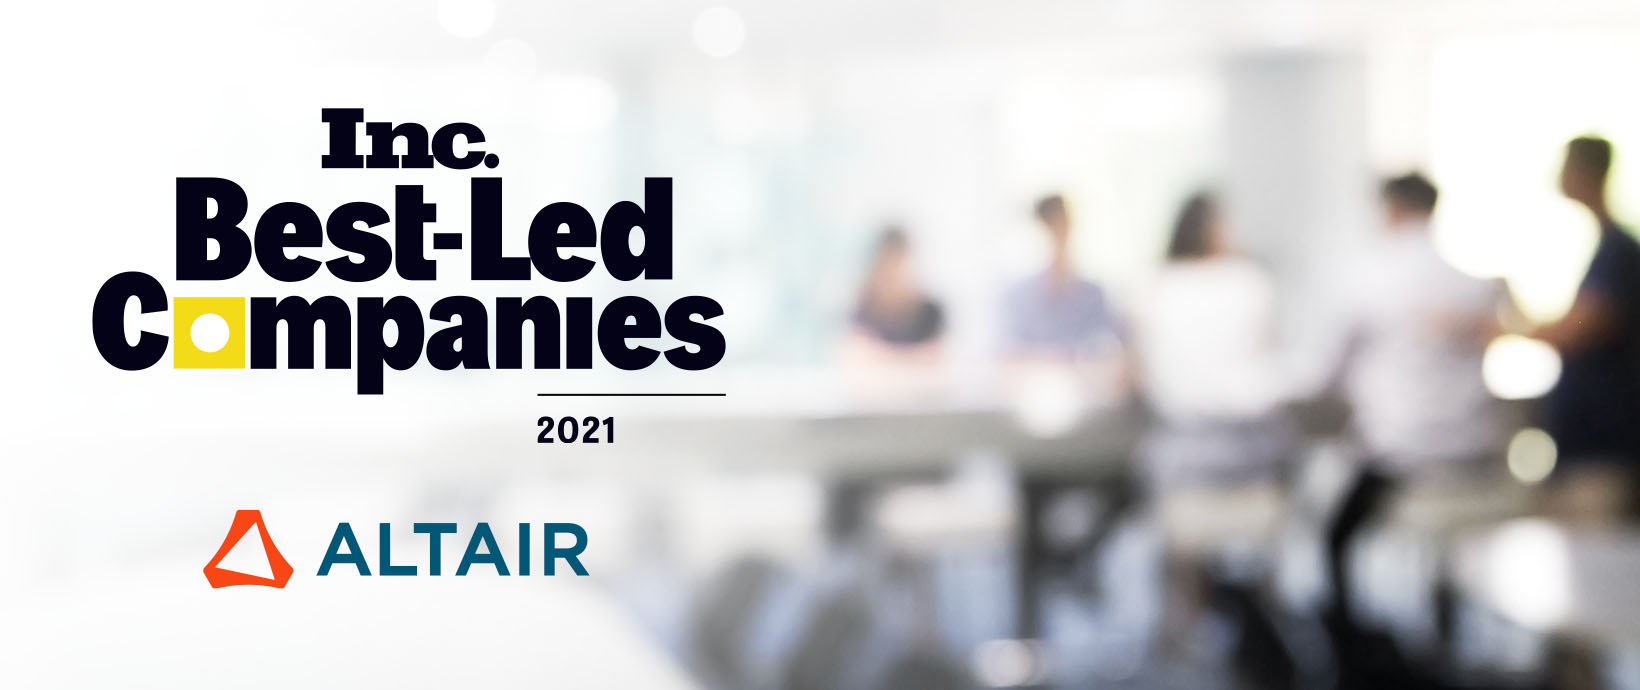 Inc. Magazine Selects Altair for 2021 Best-Led Companies List